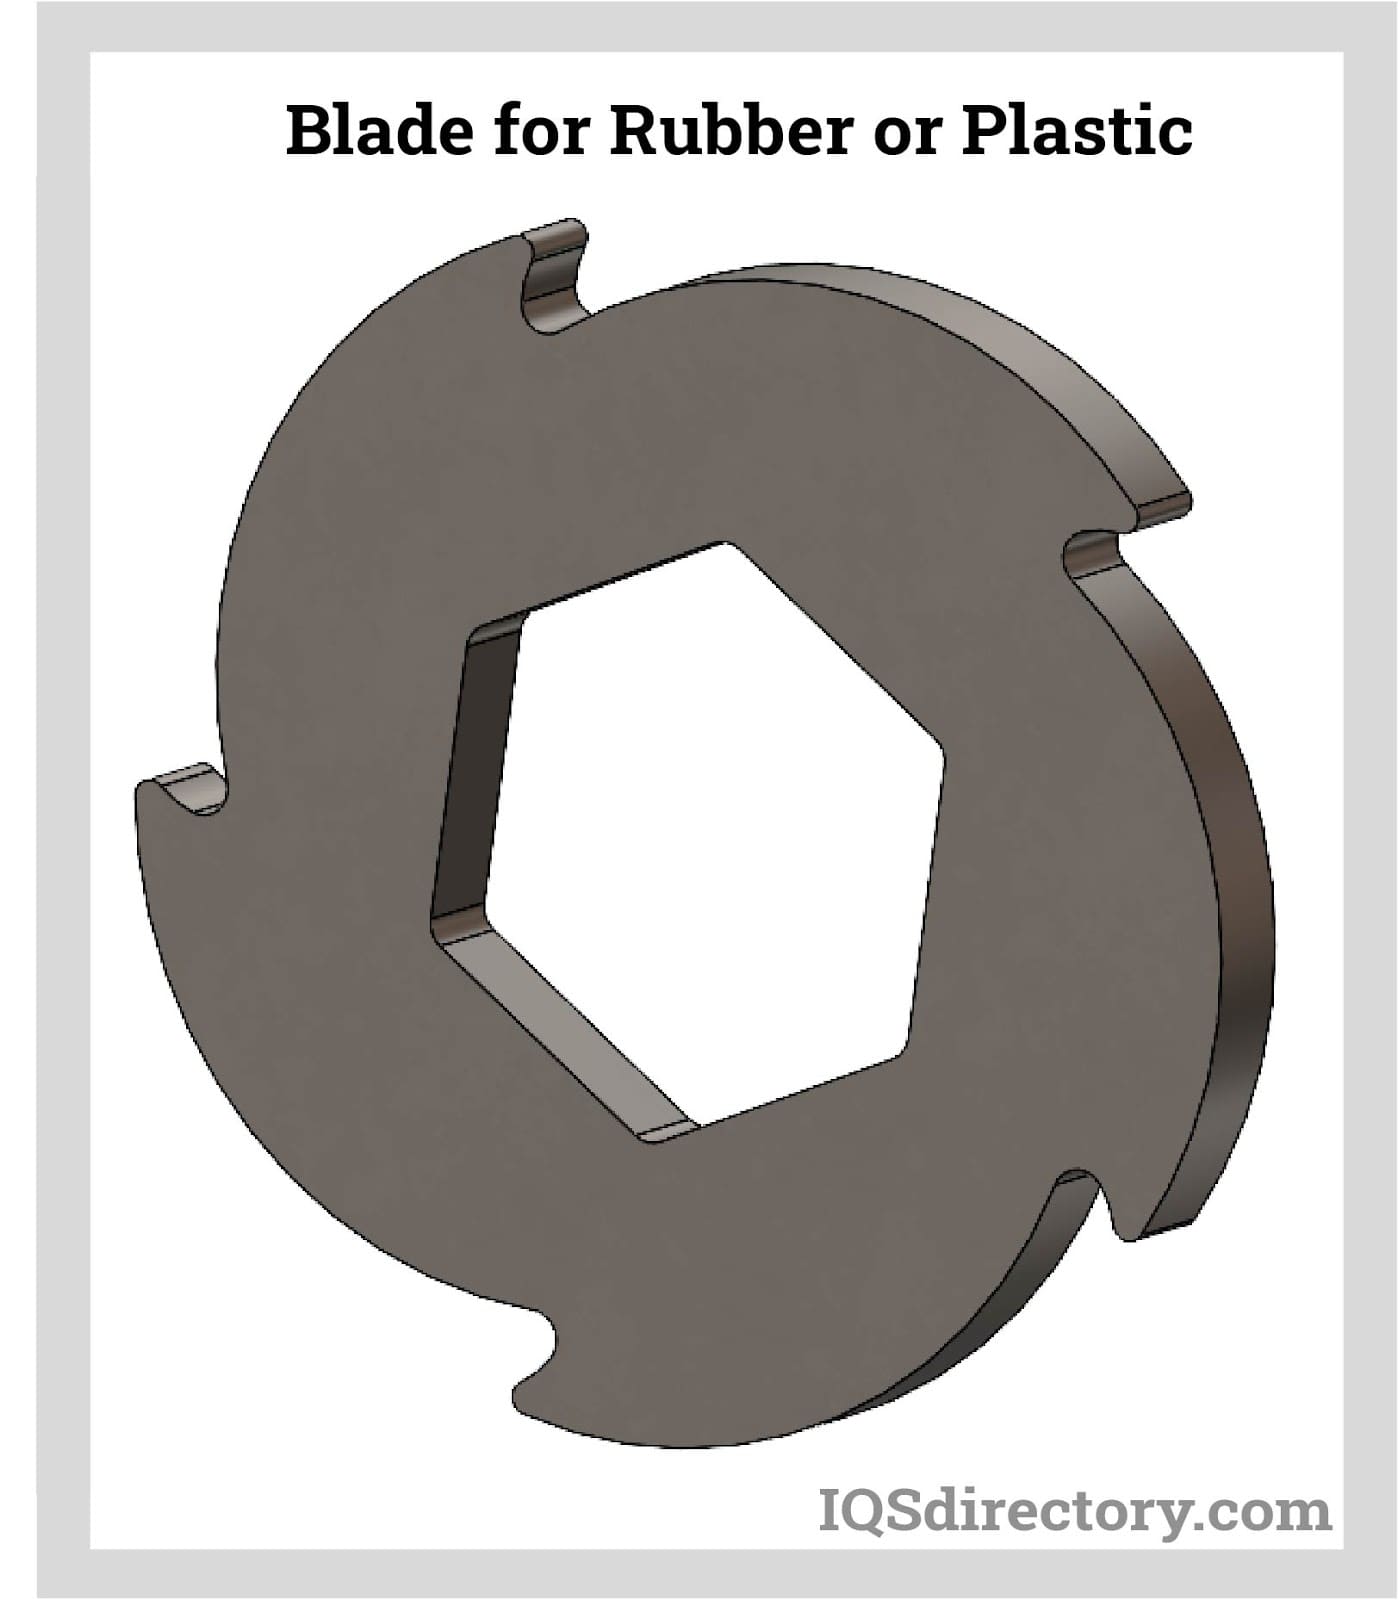 Blade for Rubber or Plastic